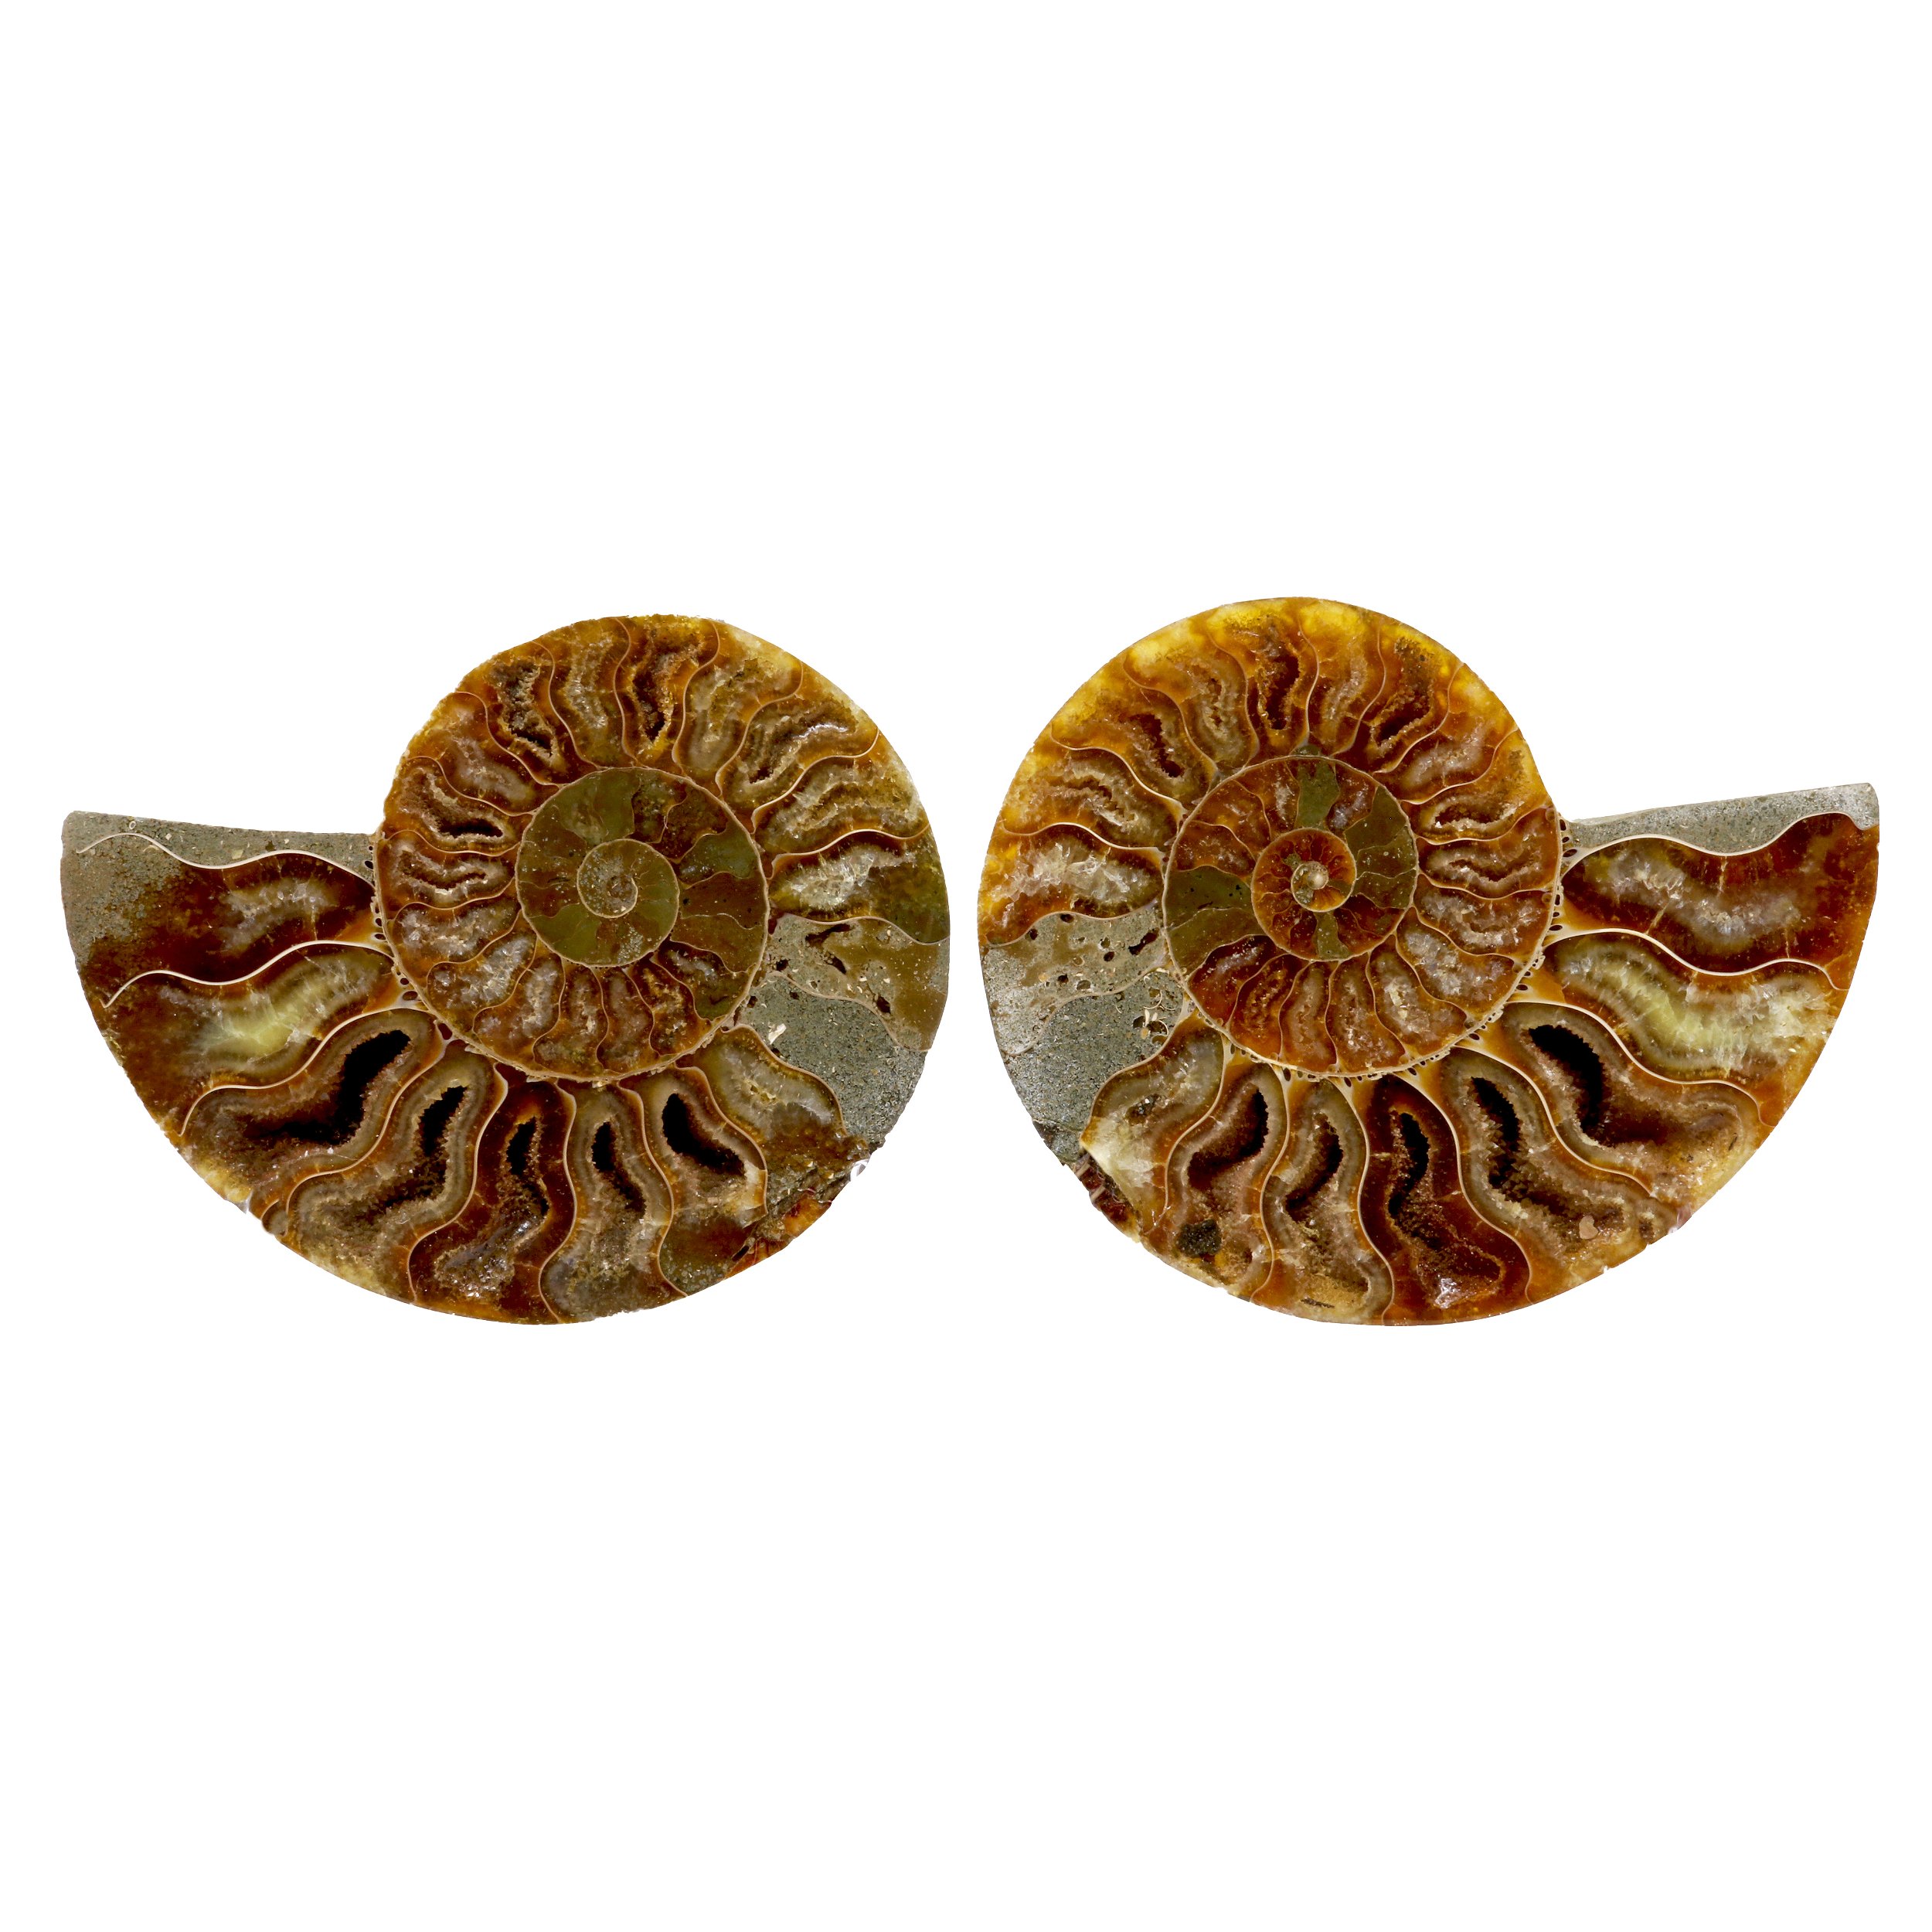 Ammonite Fossil Pair In Acrylic Stands - Gray Seabed And Druze Pockets